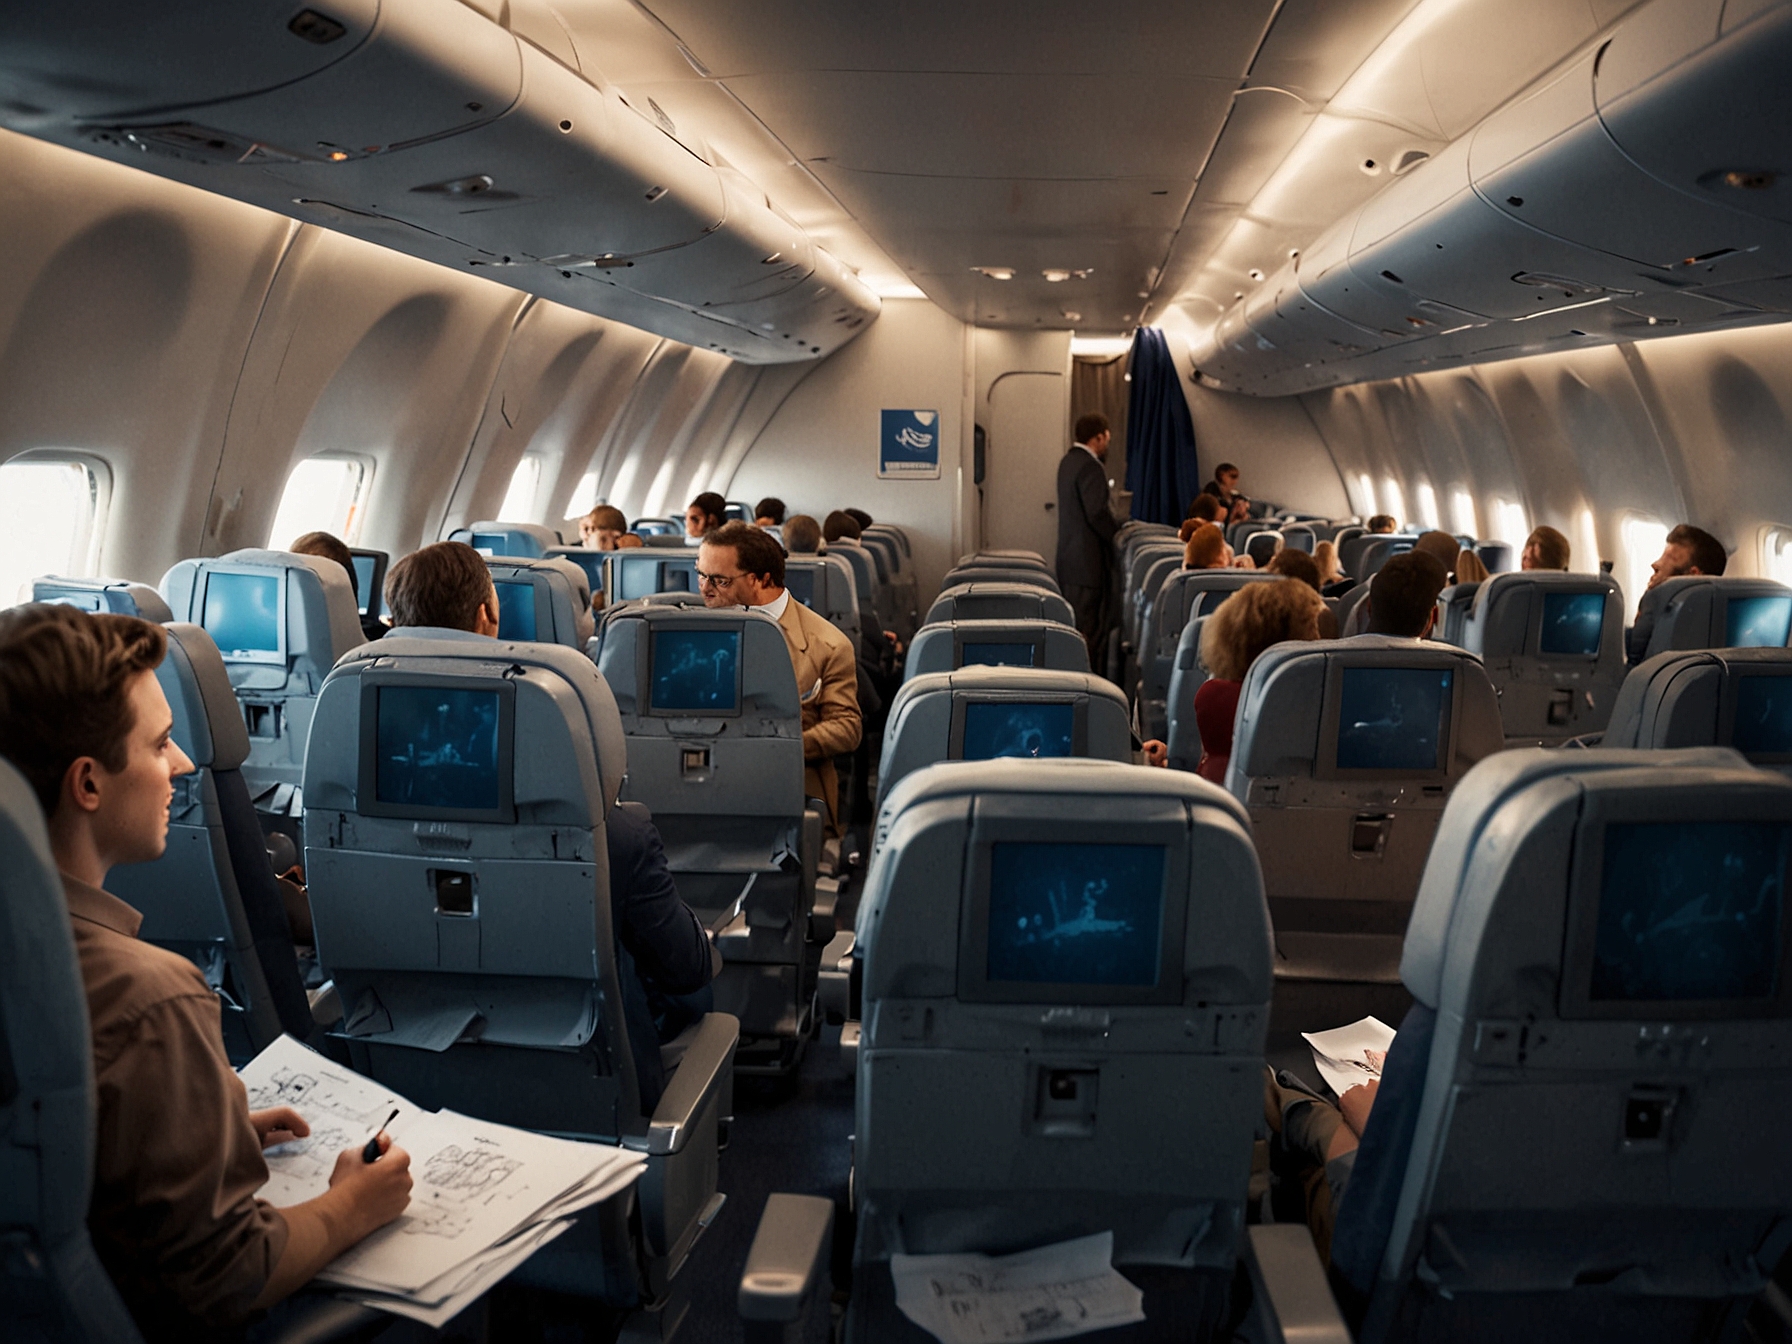 A packed United Airlines flight cabin with passengers seated, some watching in-flight entertainment screens.